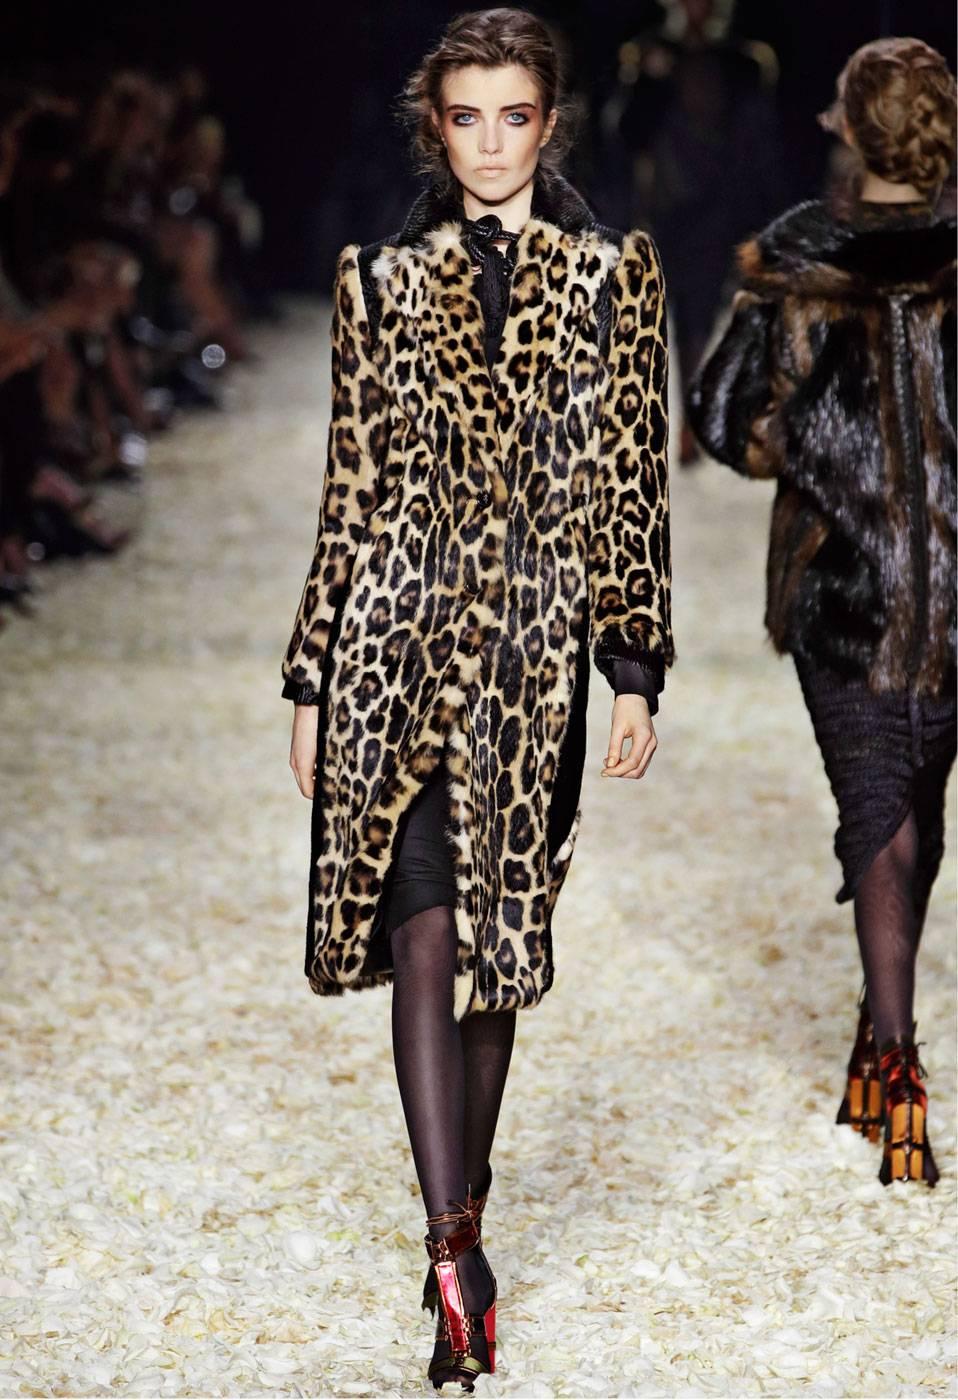 TOM FORD PRINTED LEOPARD COAT with EMBOSSED PONY FRAME

Rabbit

IT size 38 

New, with tags.